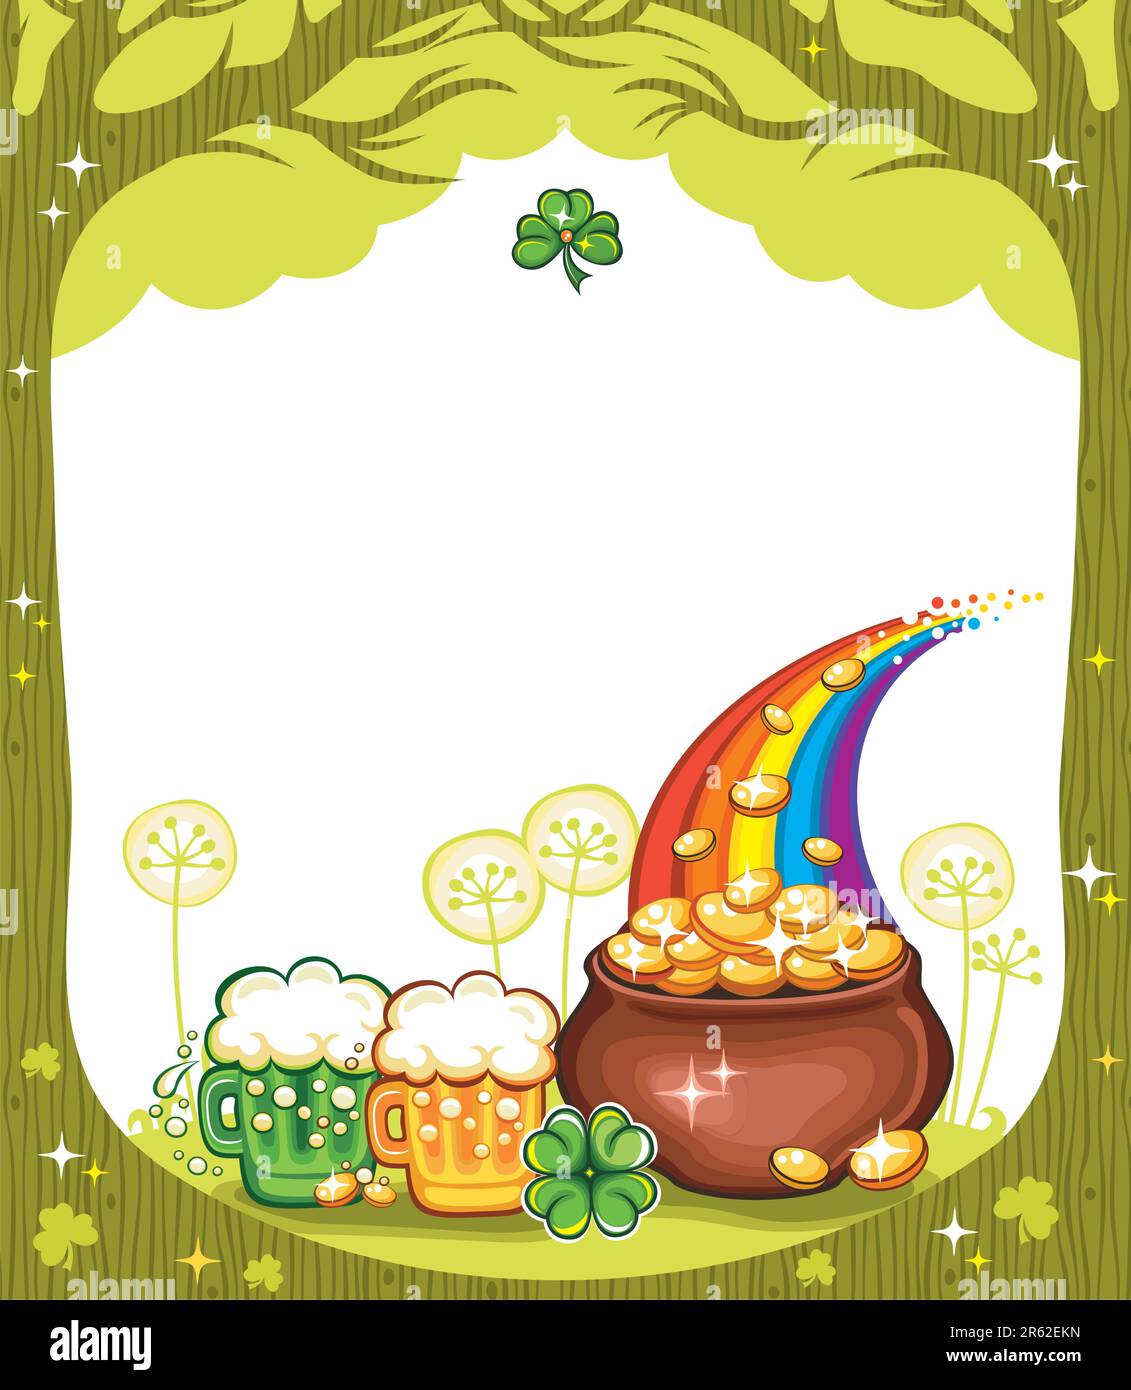 St. Patricks Day frame with trees, pot of gold, beer mugs, clover Stock Vector